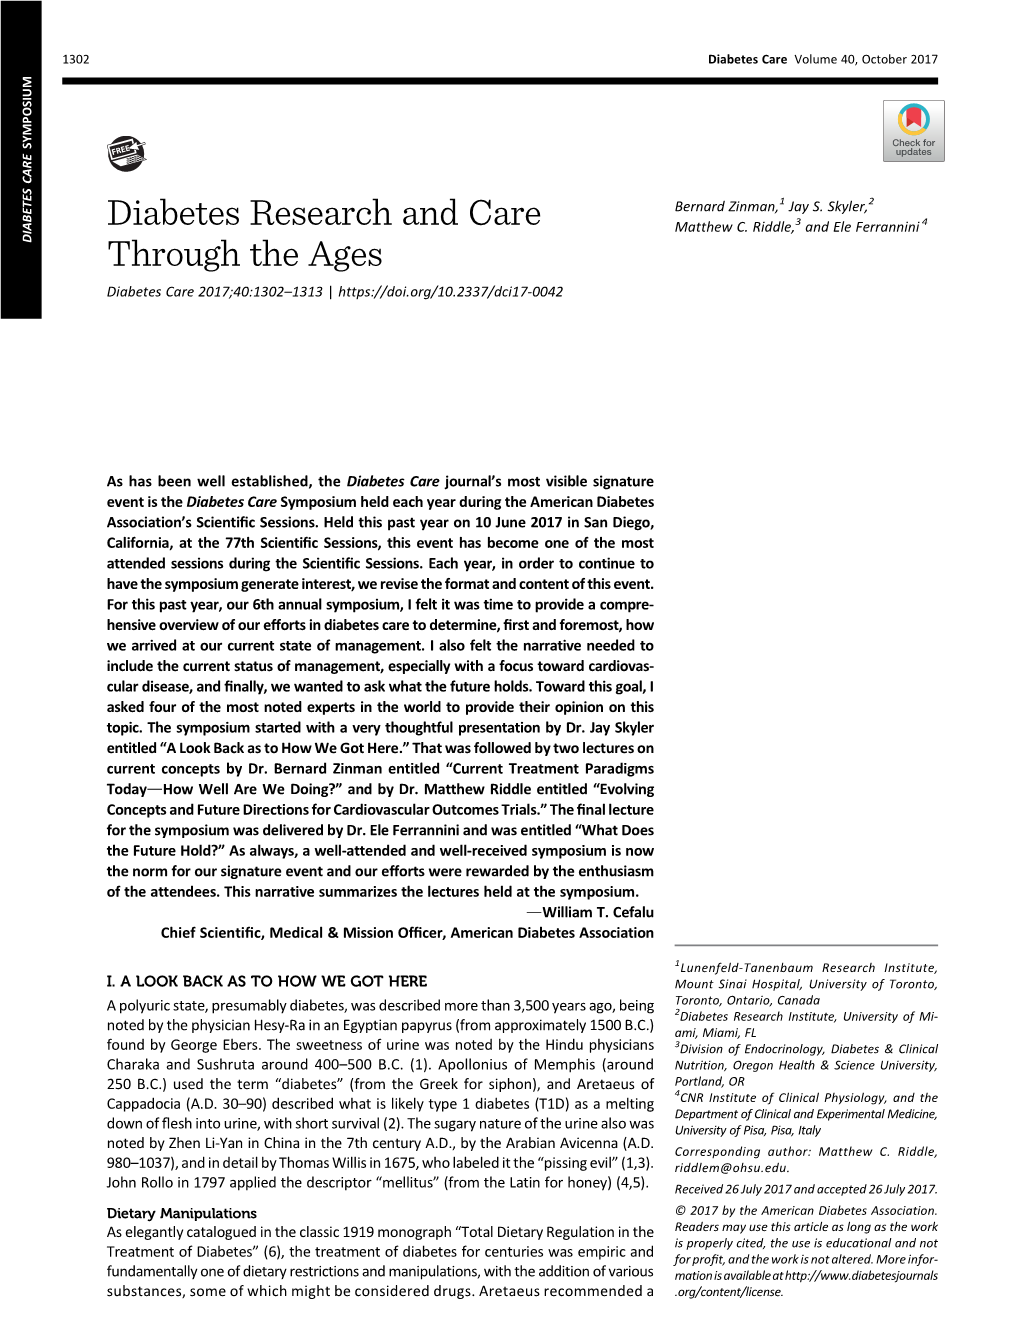 Diabetes Research and Care Through the Ages Diabetes Care Volume 40, October 2017